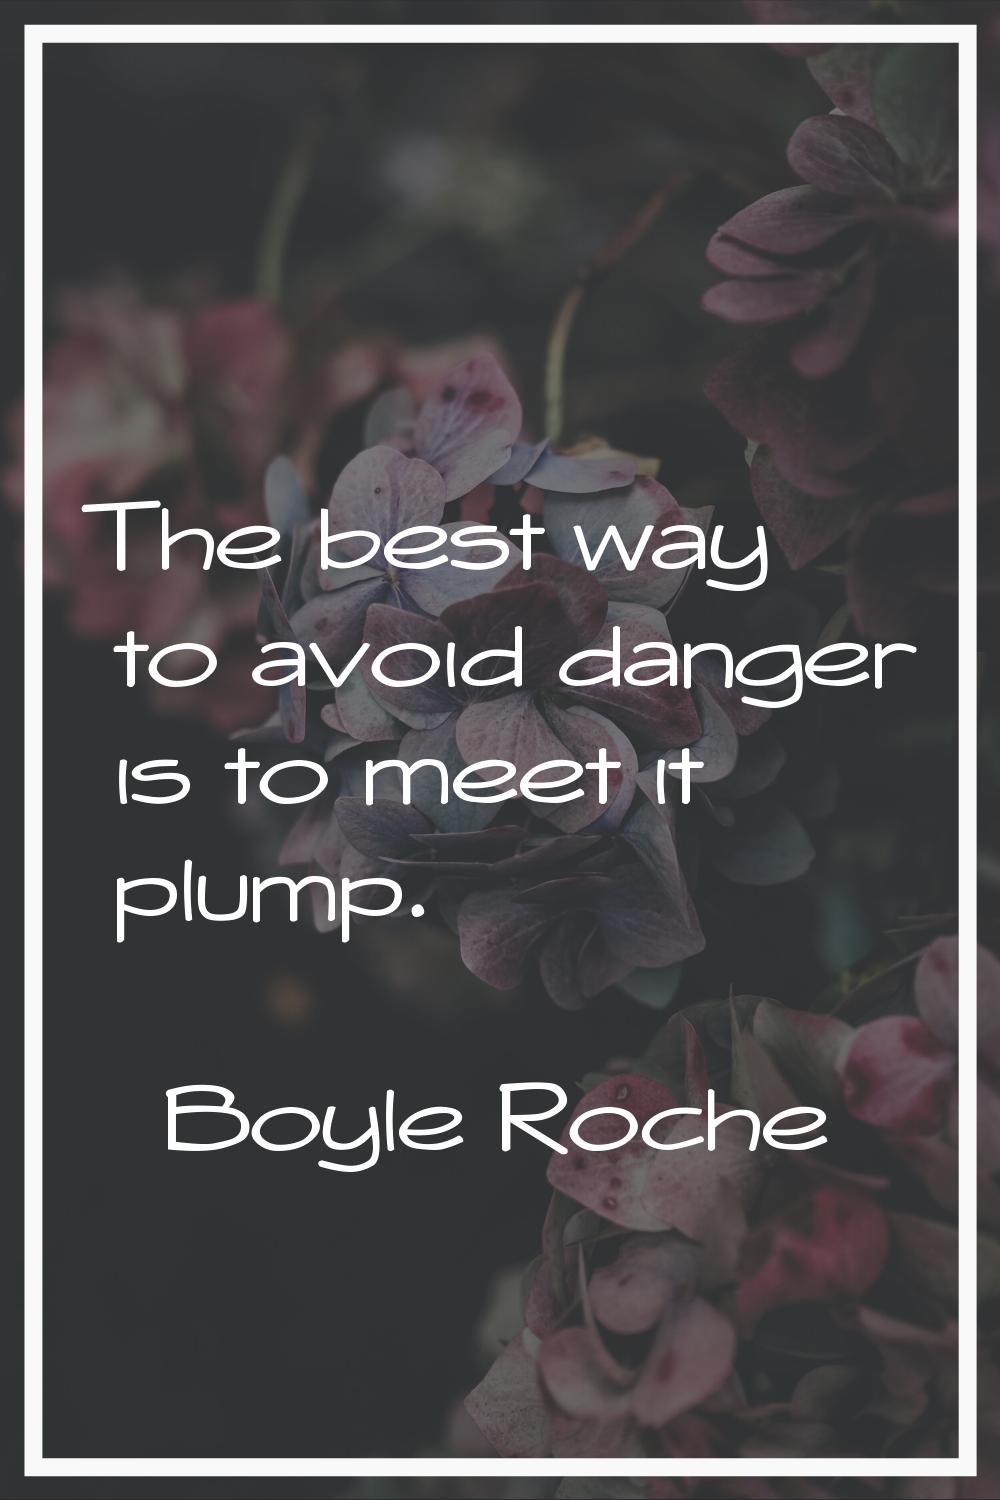 The best way to avoid danger is to meet it plump.